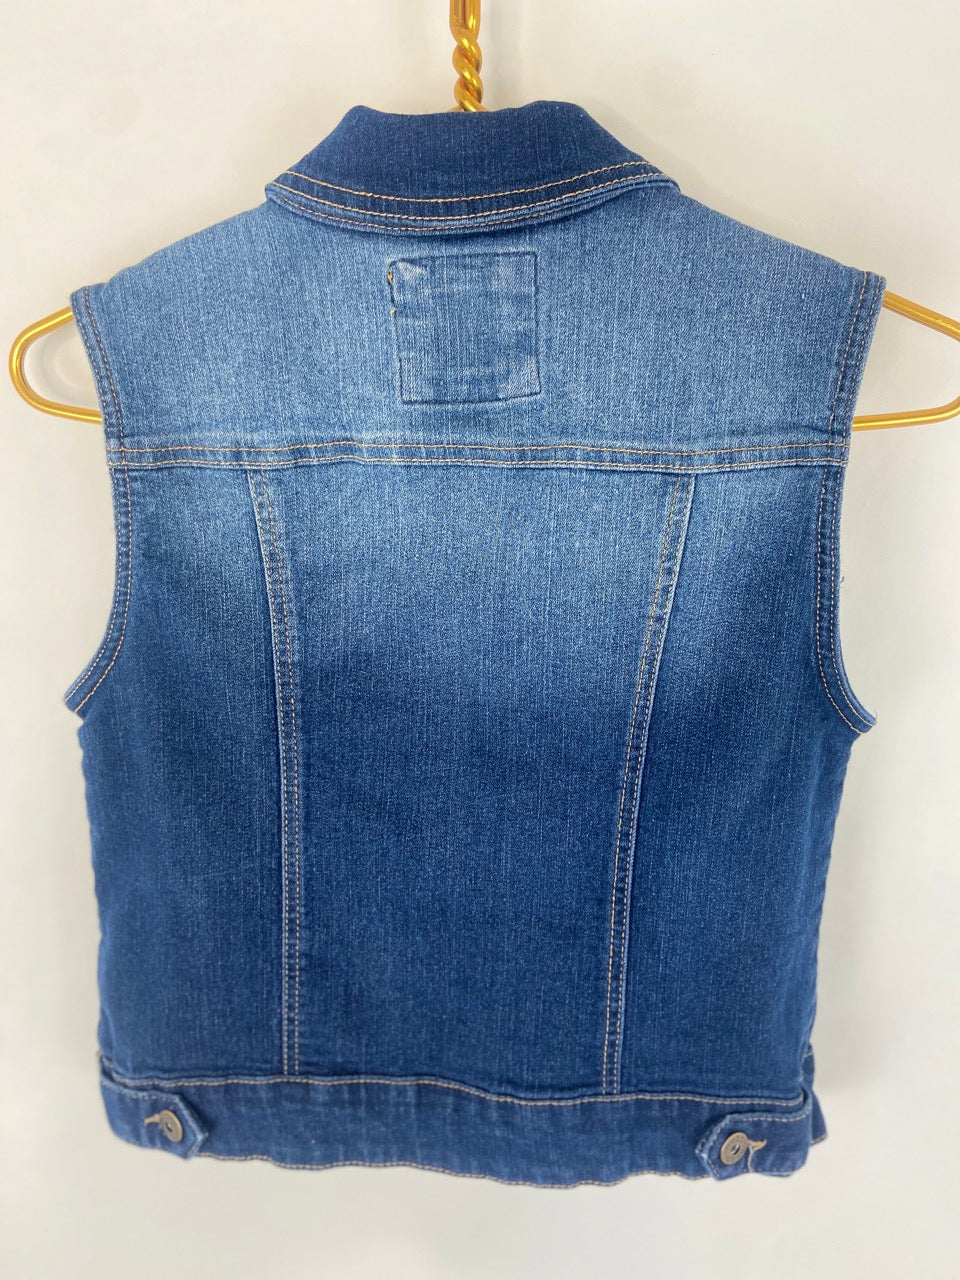 Distressed Denim Vest- Youth M and L